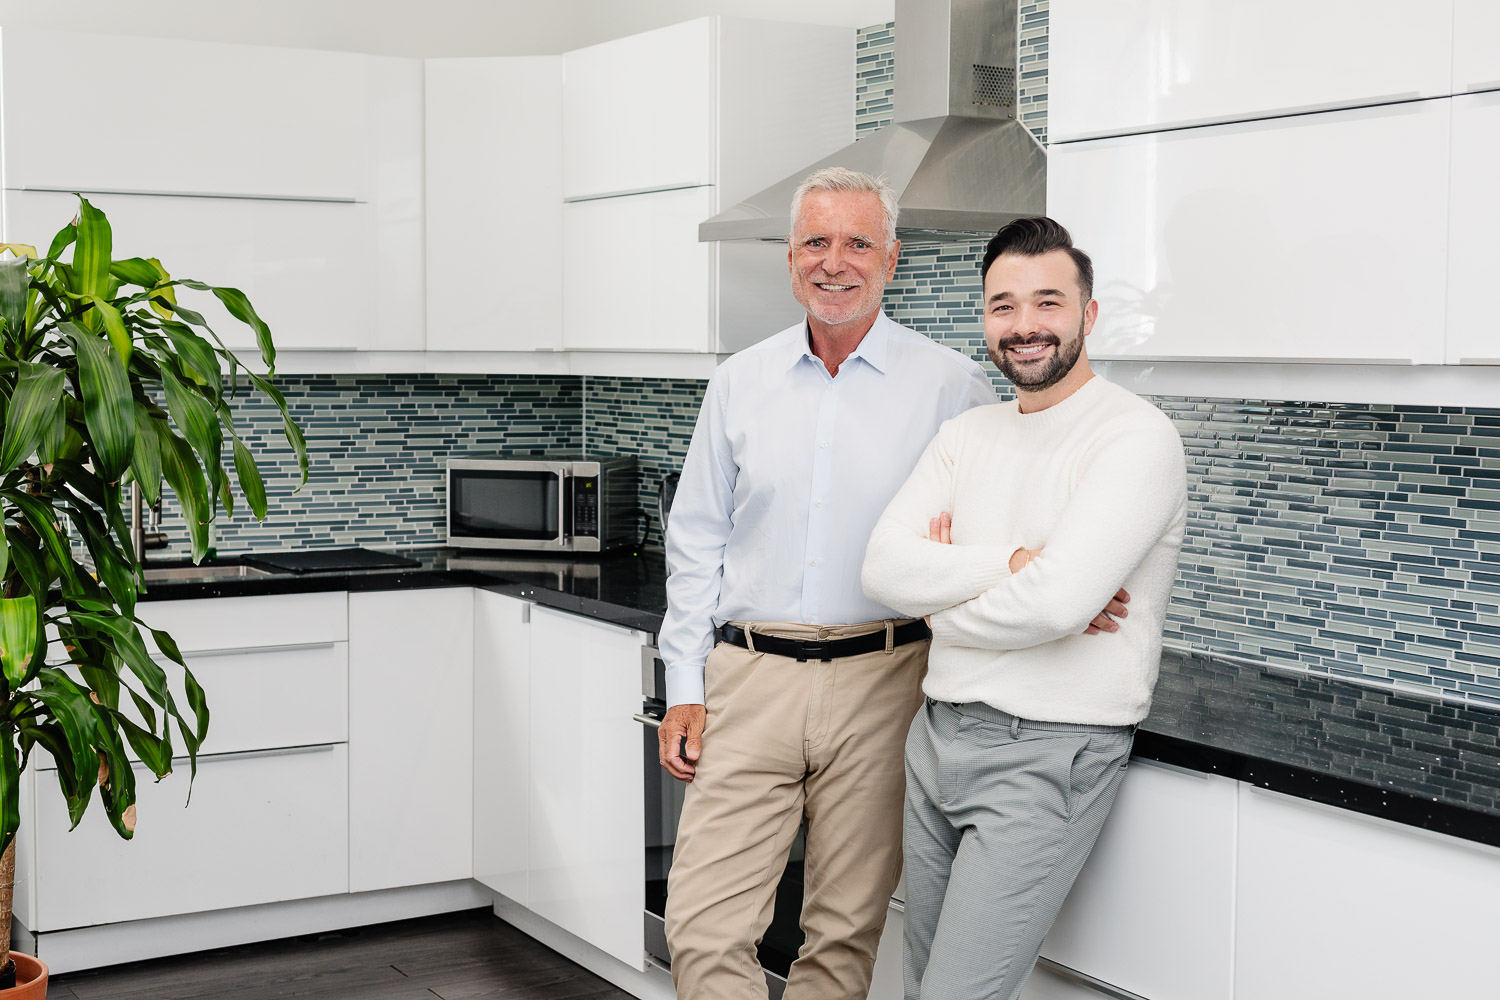 Toronto realtors posing for a photoshoot in a kitchen